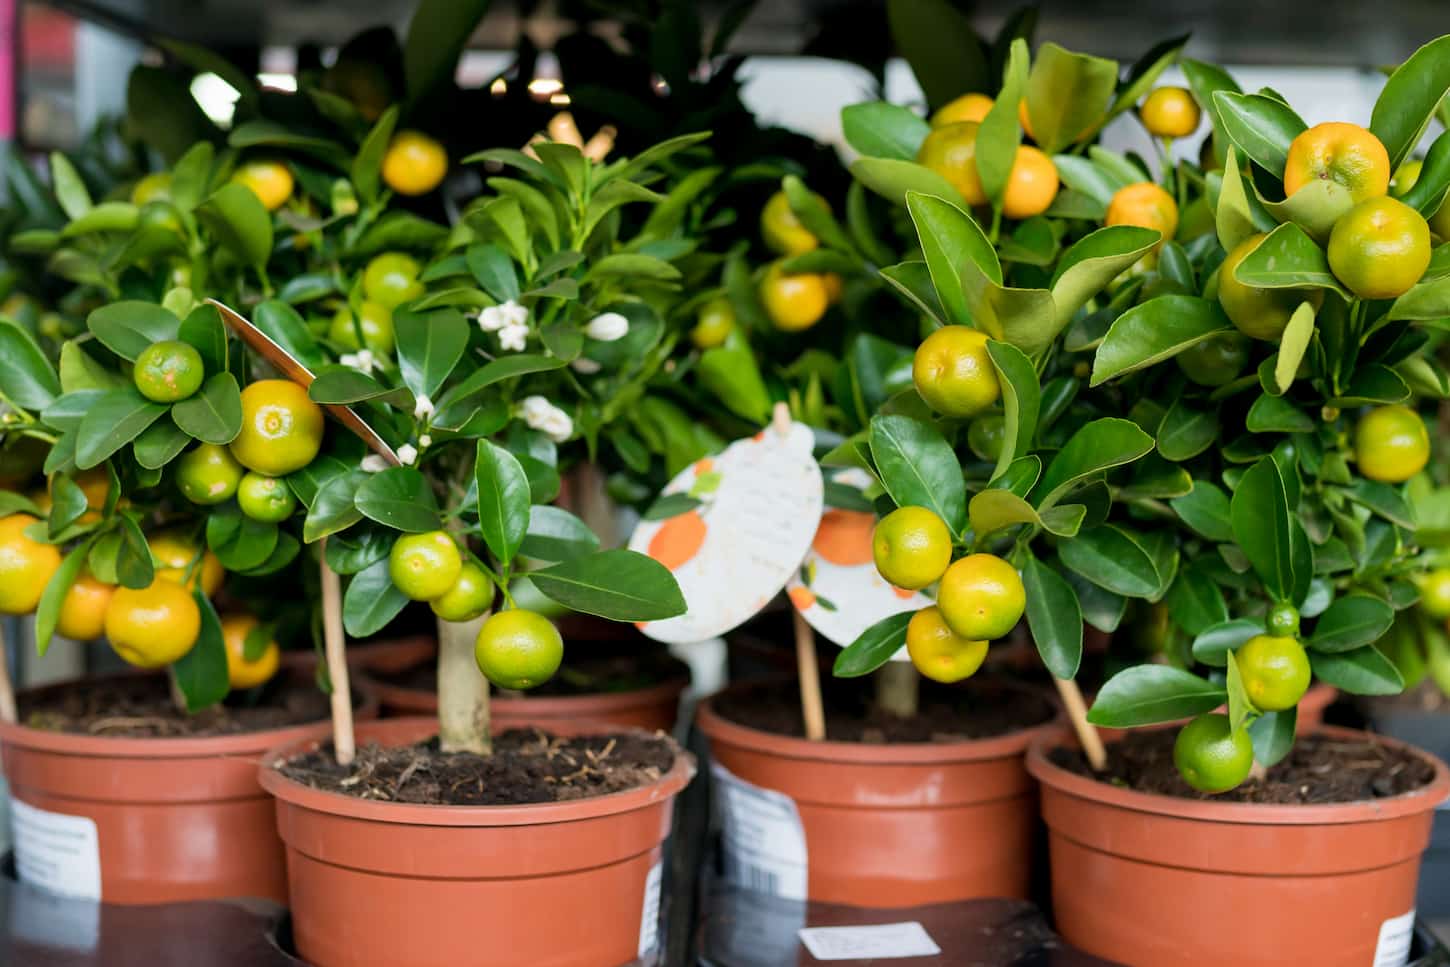 An image of a tangerine tree in a pot in the nursery.